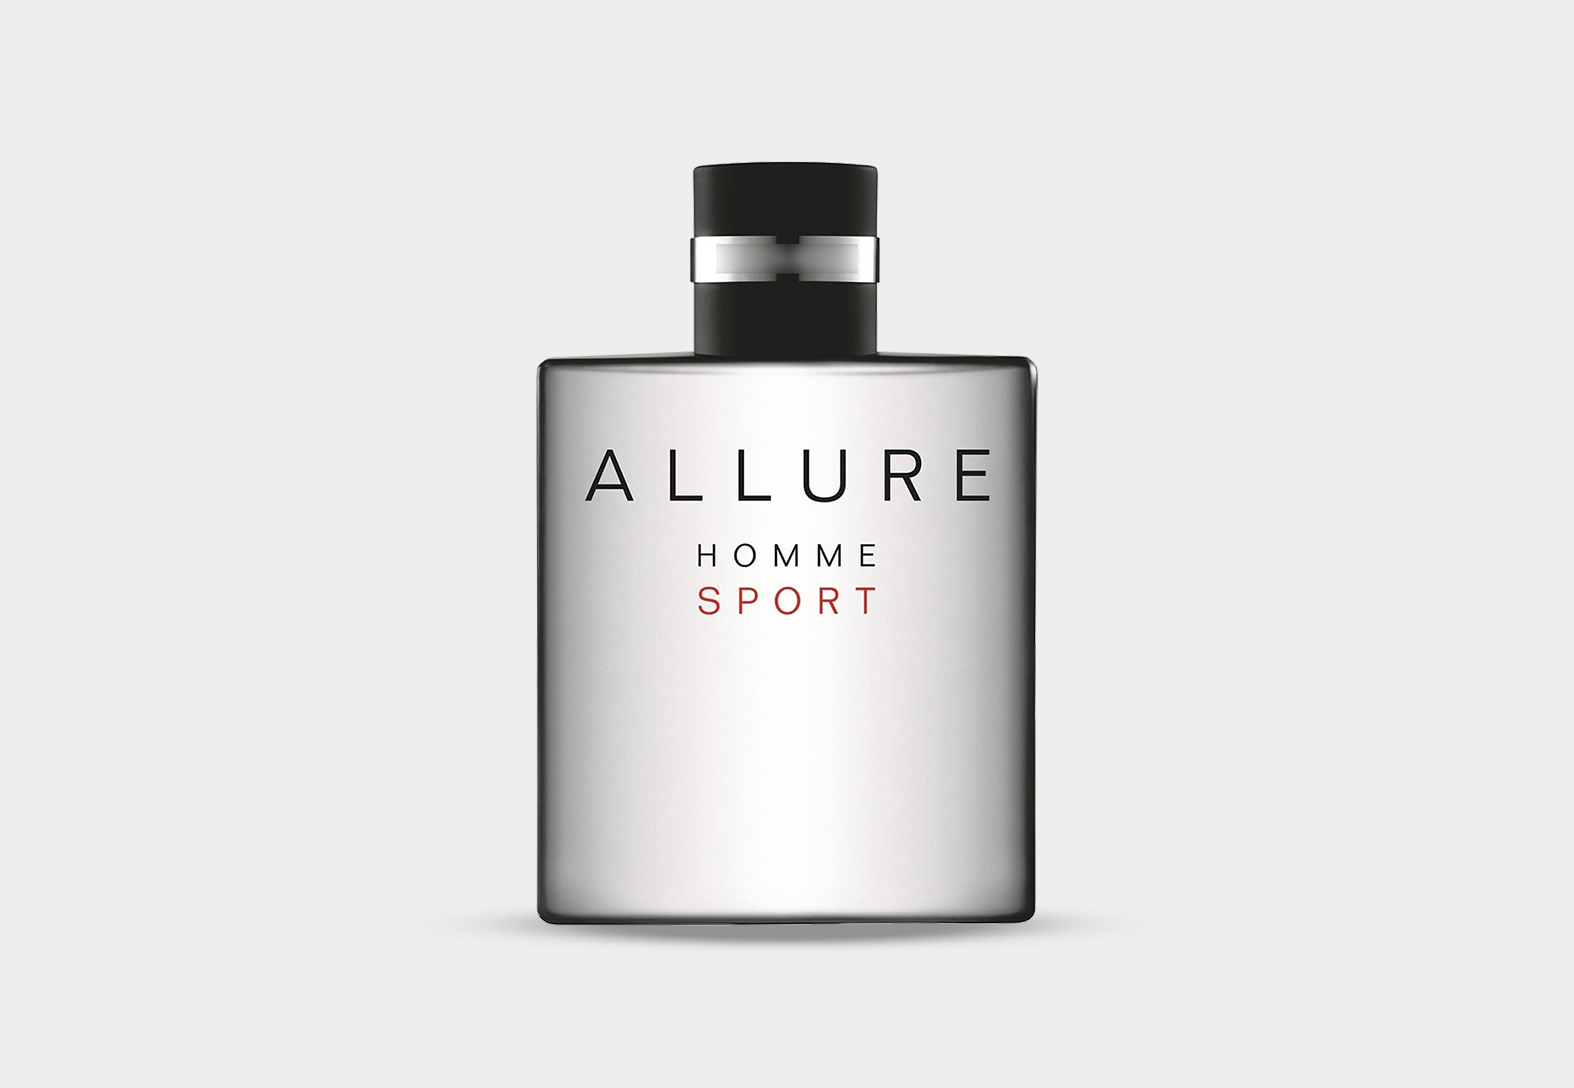 Духи allure homme. Chanel Allure homme Sport 100ml. Chanel Allure Sport. Chanel Allure homme Sport. Chanel Allure homme 100 ml.